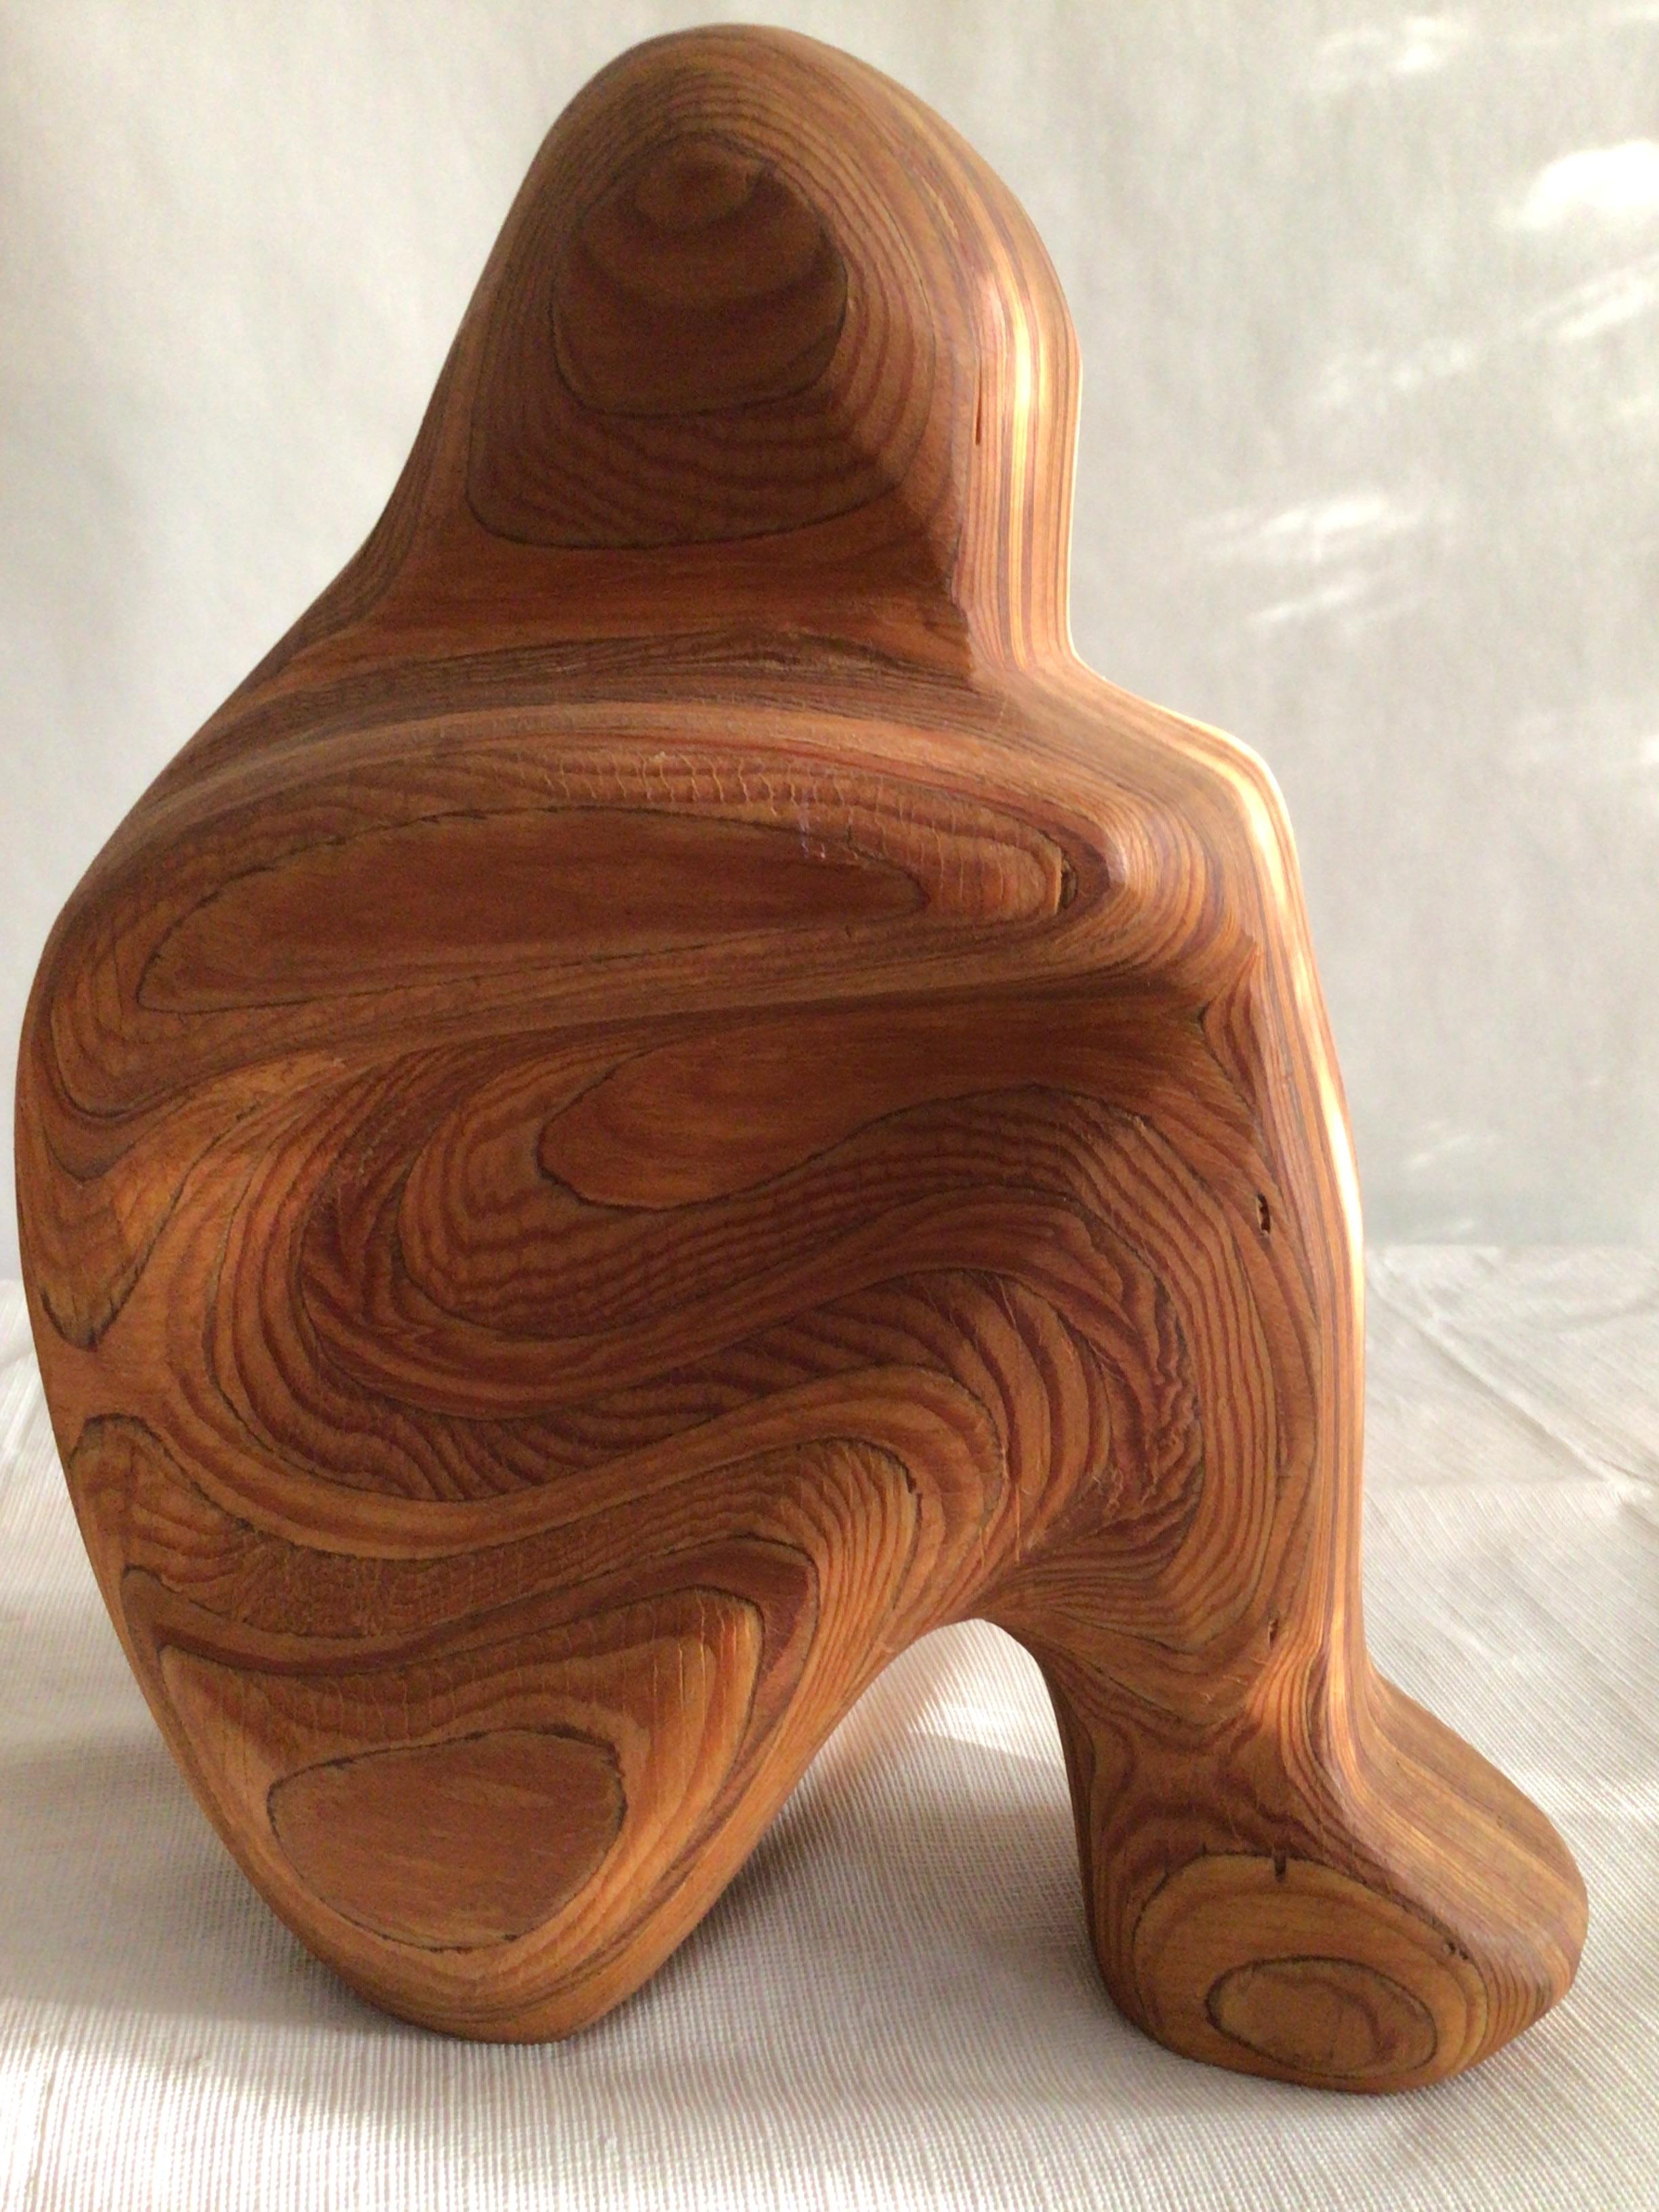 1980s Swirled Wood Sculptural Bookends For Sale 3